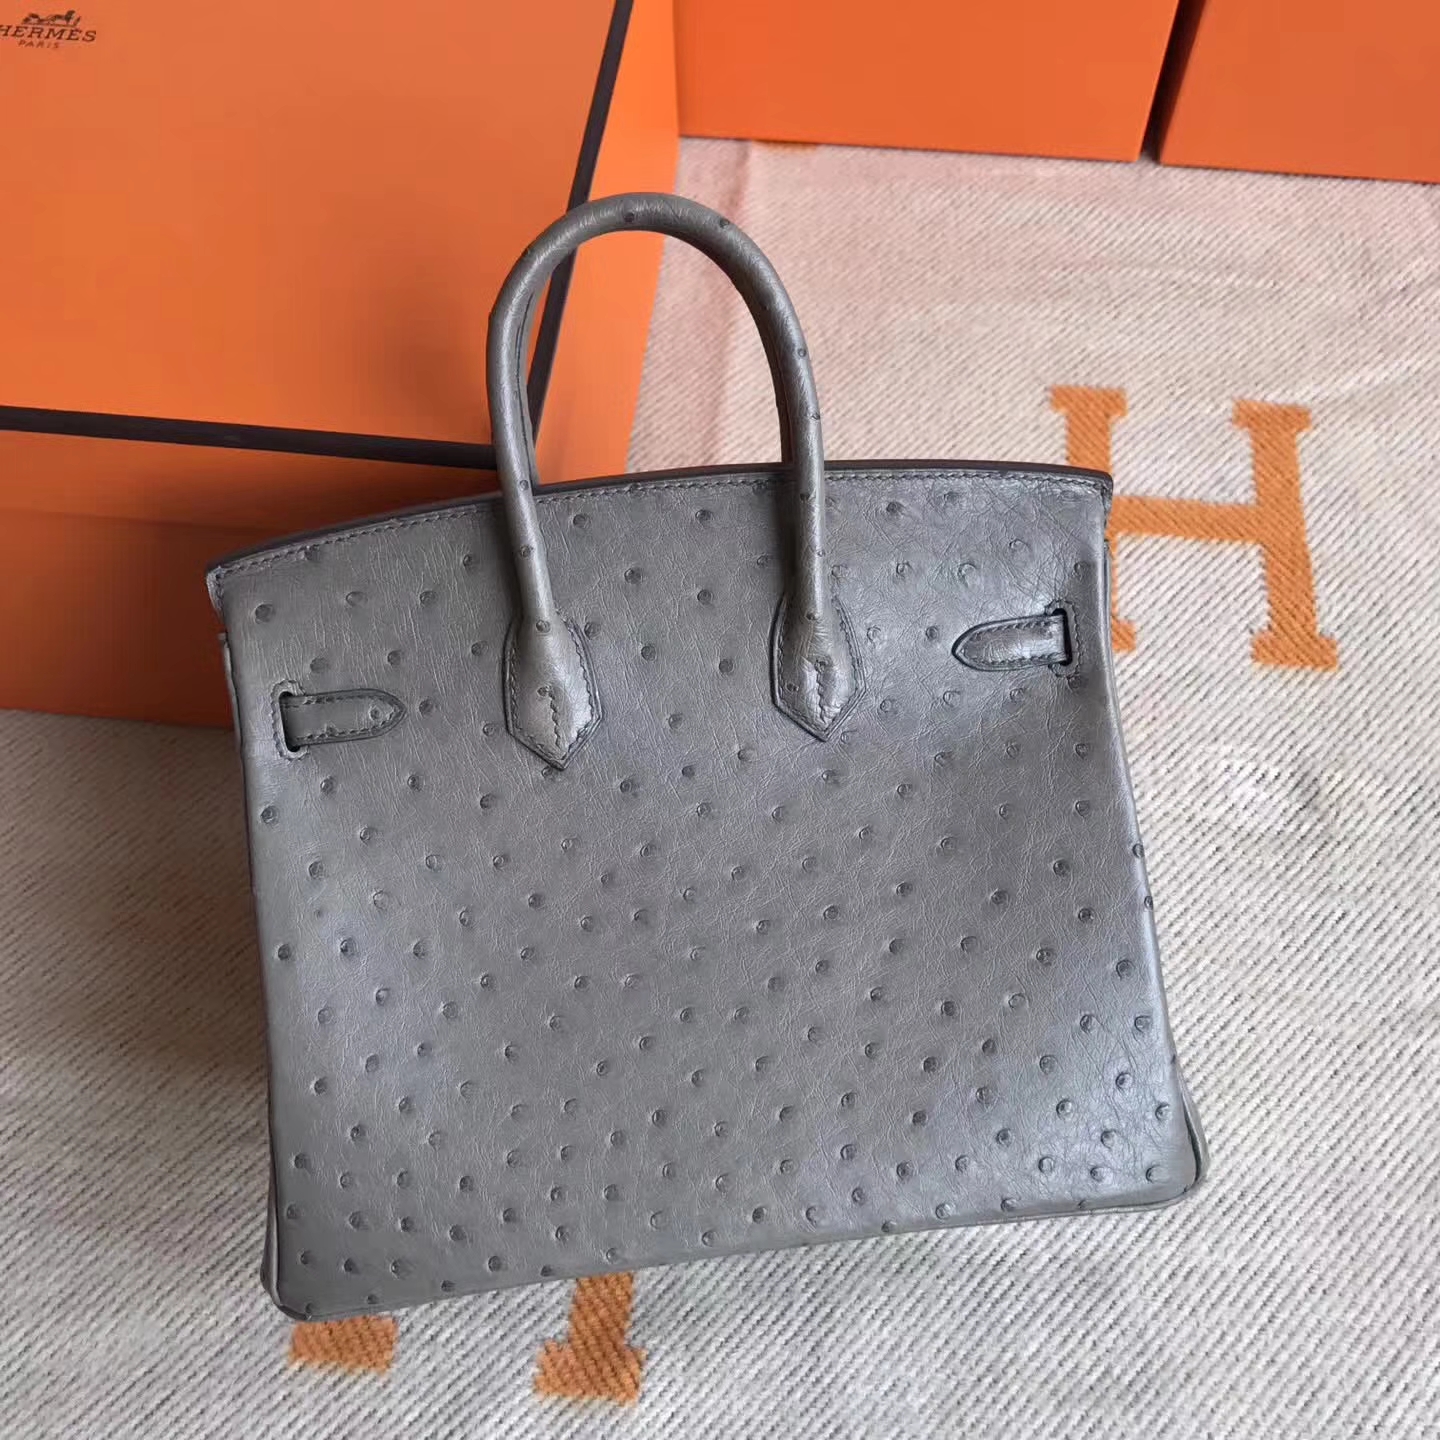 Discount Hermes Ostrich Leather Birkin Bag25cm in Mousse Grey Silver Hardware